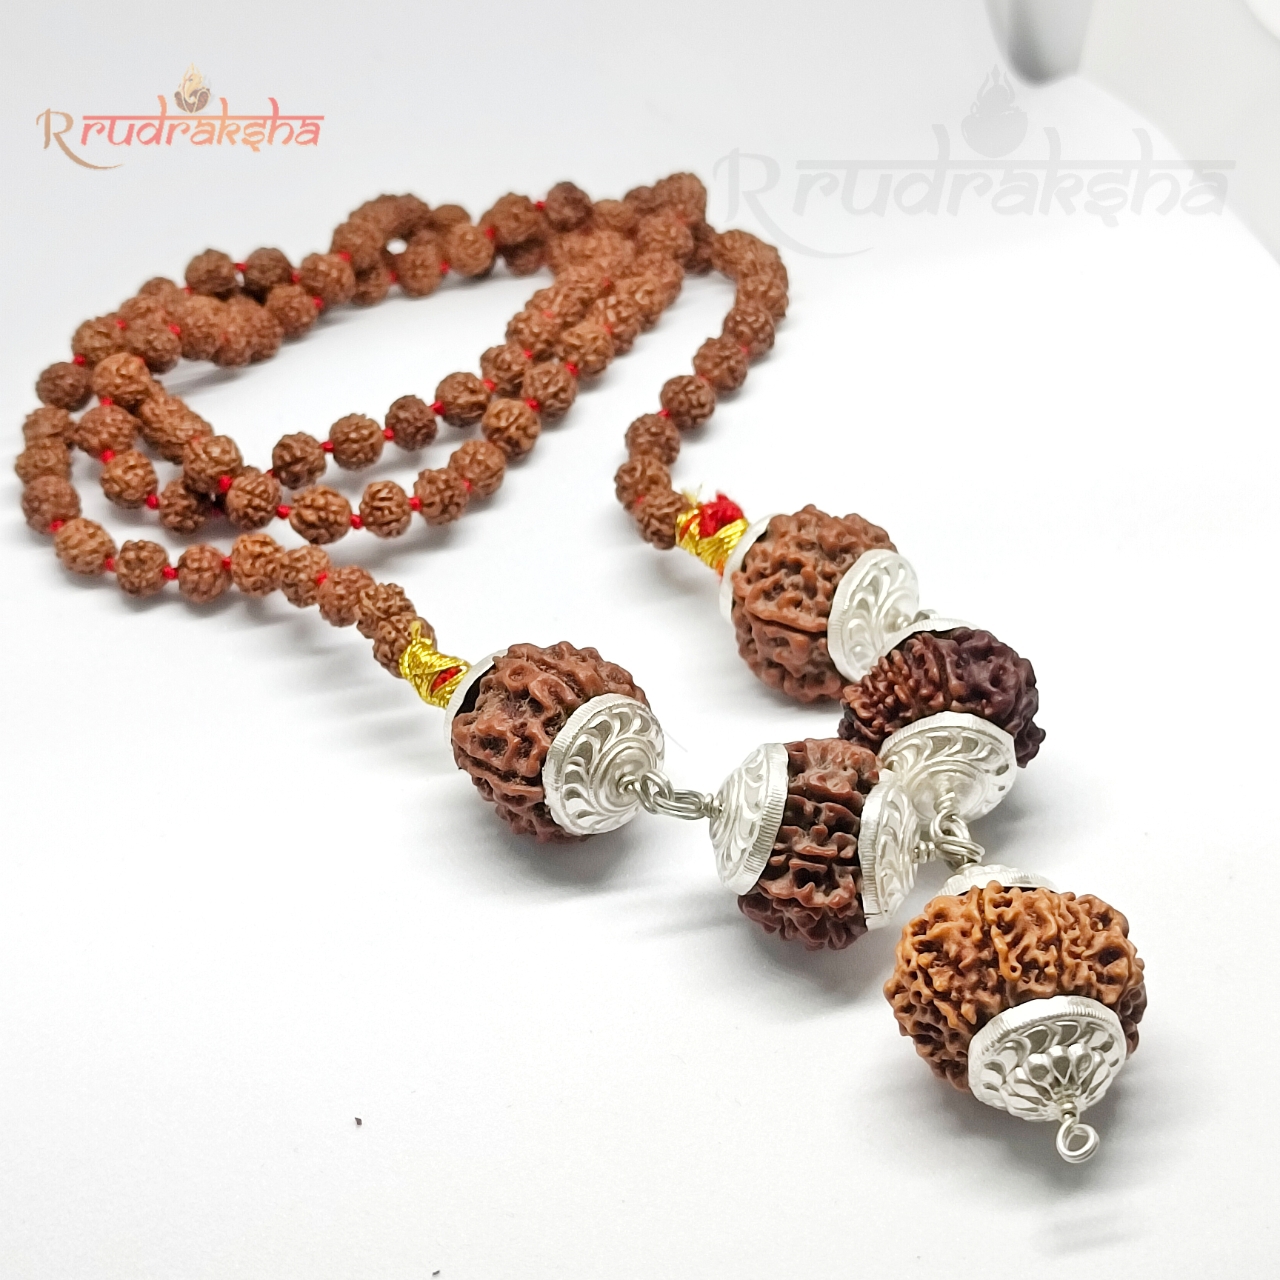 5 7 9 10 and 13 Mukhi Rudraksha Combination For Building Self Love, Charms and Braveness